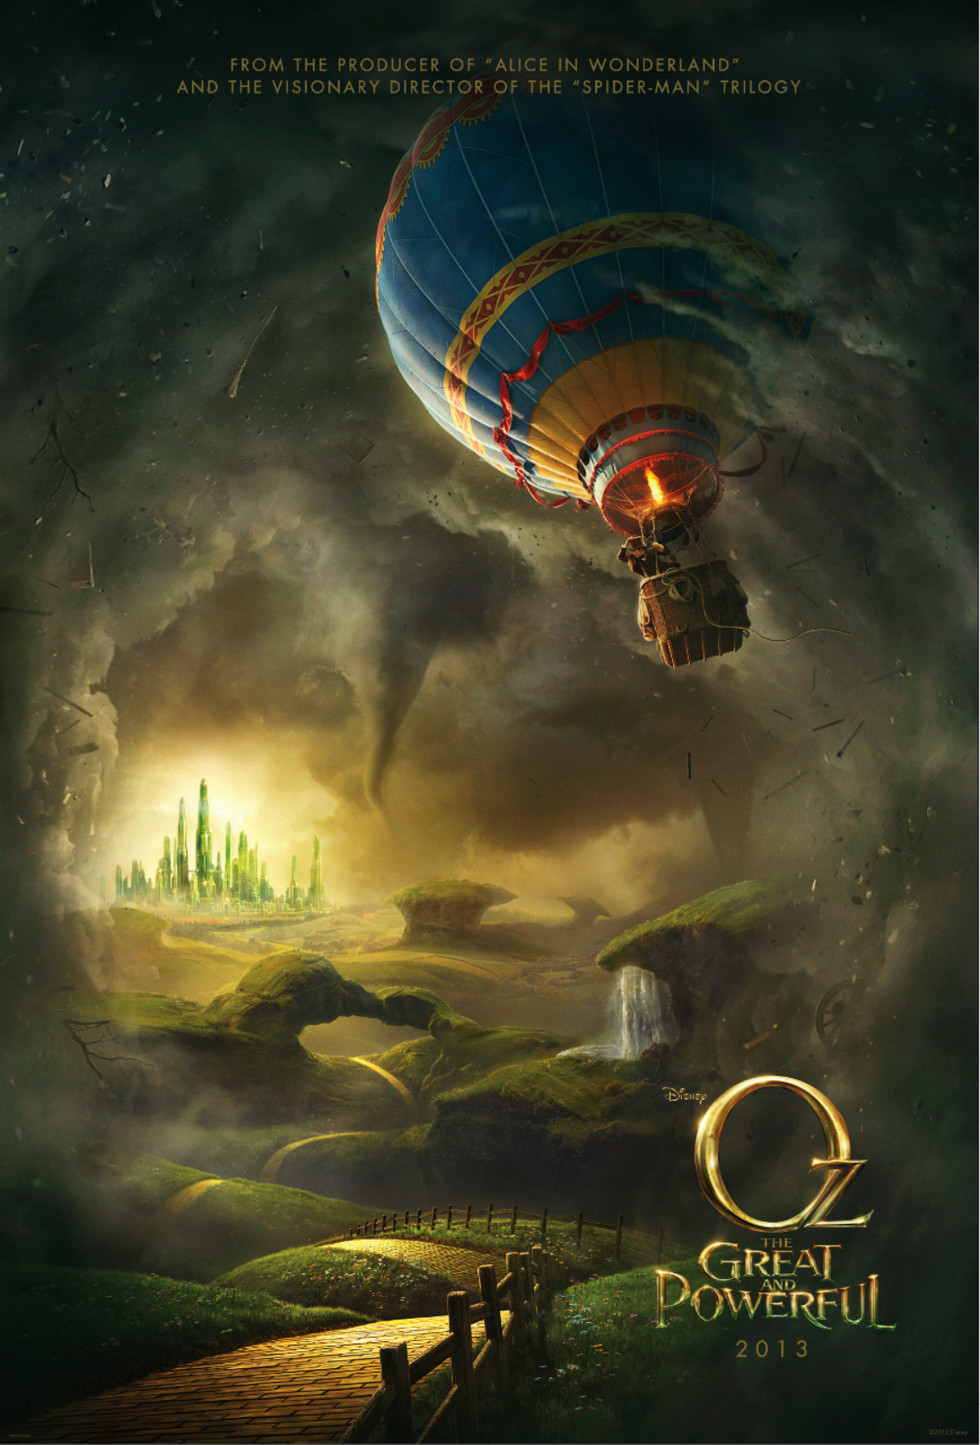 Oz the Great and Powerful - Movie Poster #4 (Large)